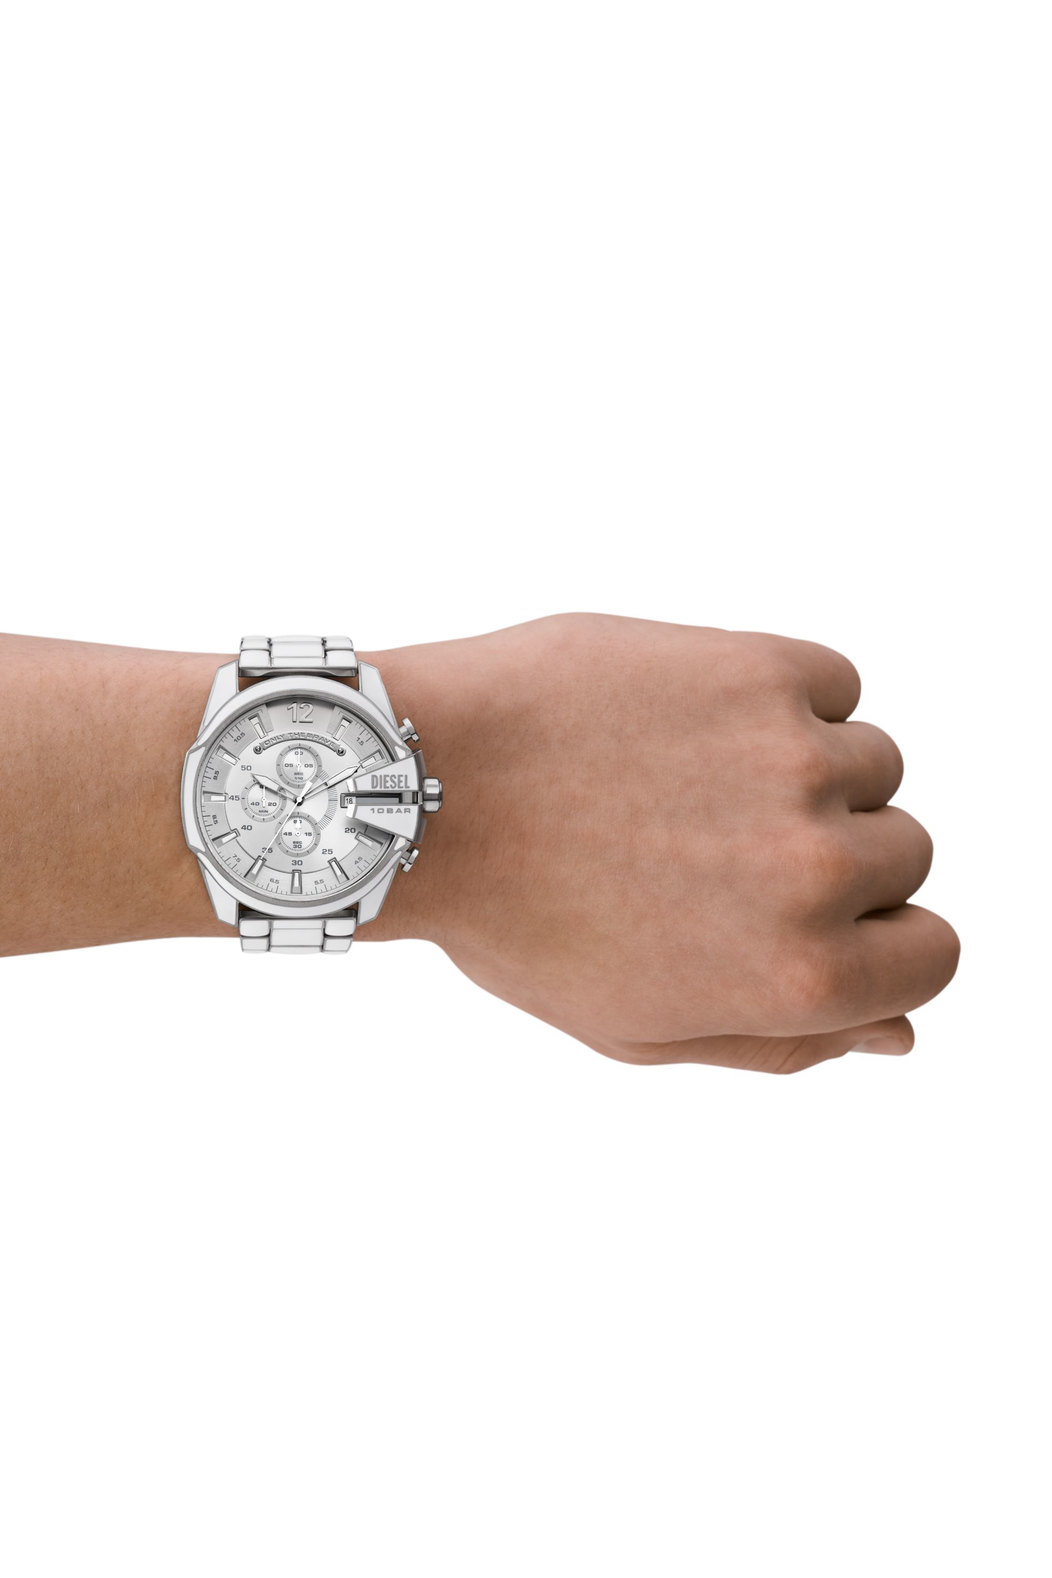 Diesel Mega Chief Chronograph White and Stainless Steel Watch